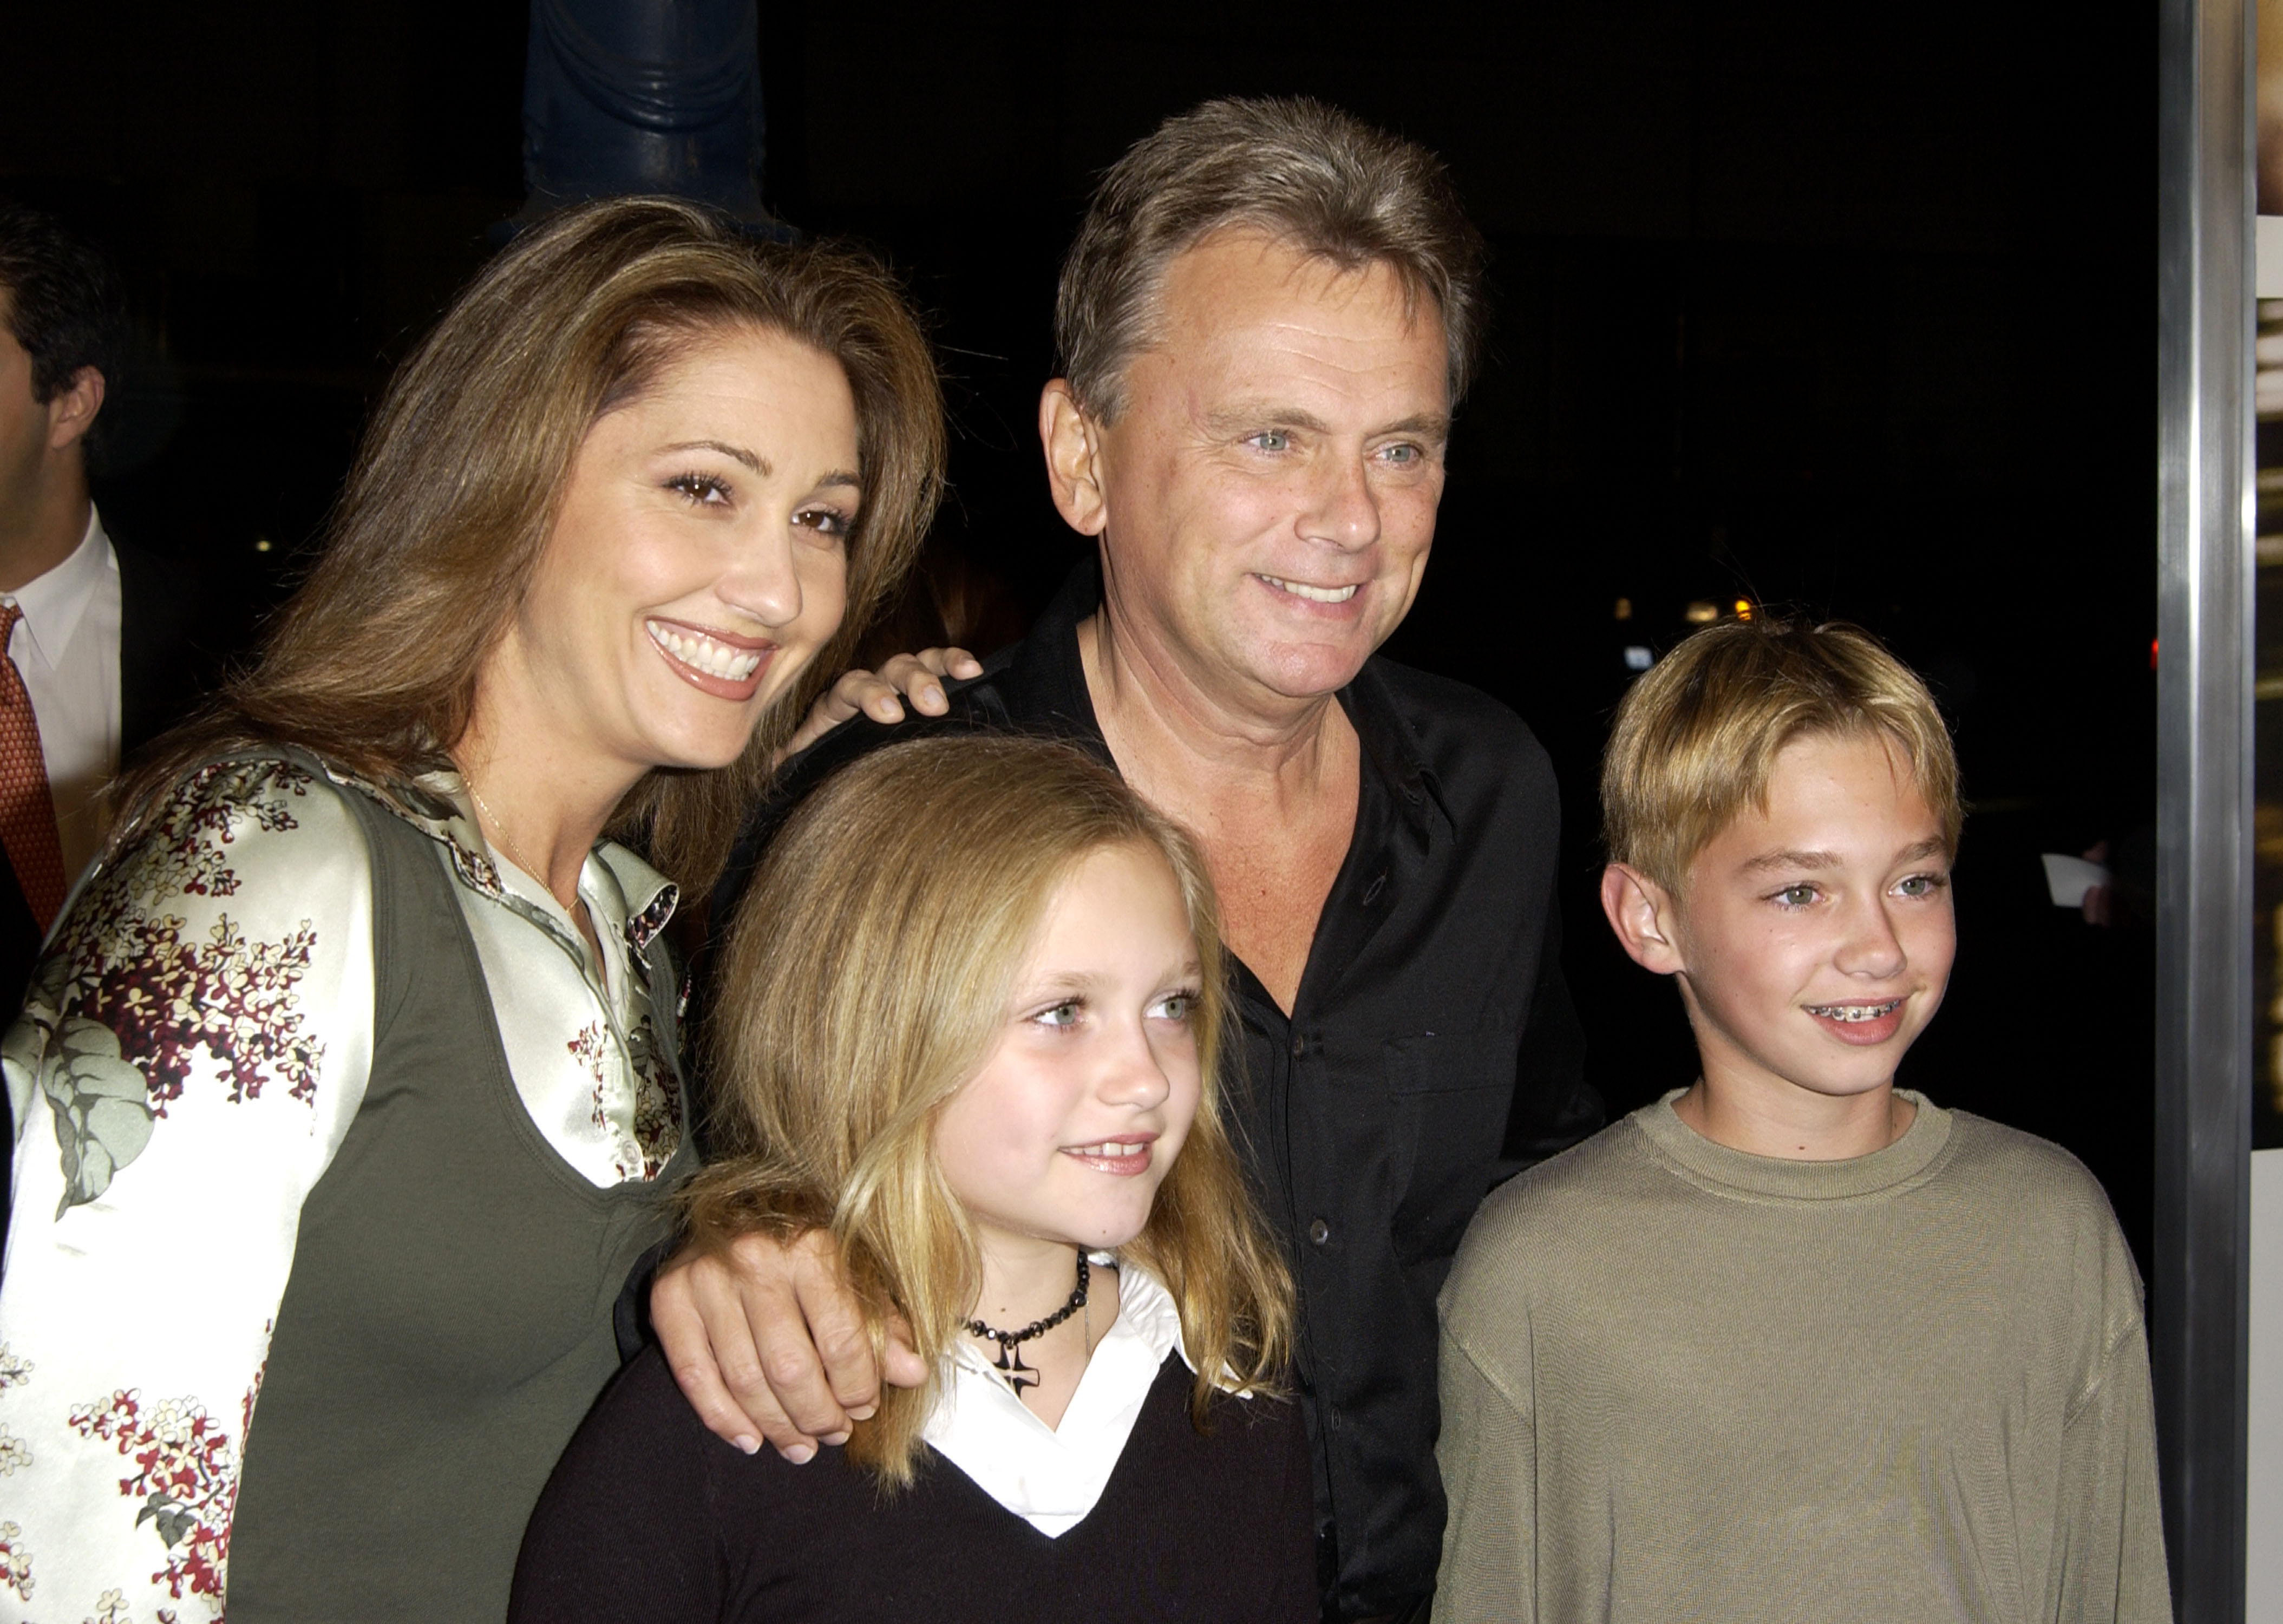 Lesly Brown, Pat Sajak, Margaret Sajak, and Patrick Sajak at an event in 2003 in Beverly Hills, California | Source: Getty Images